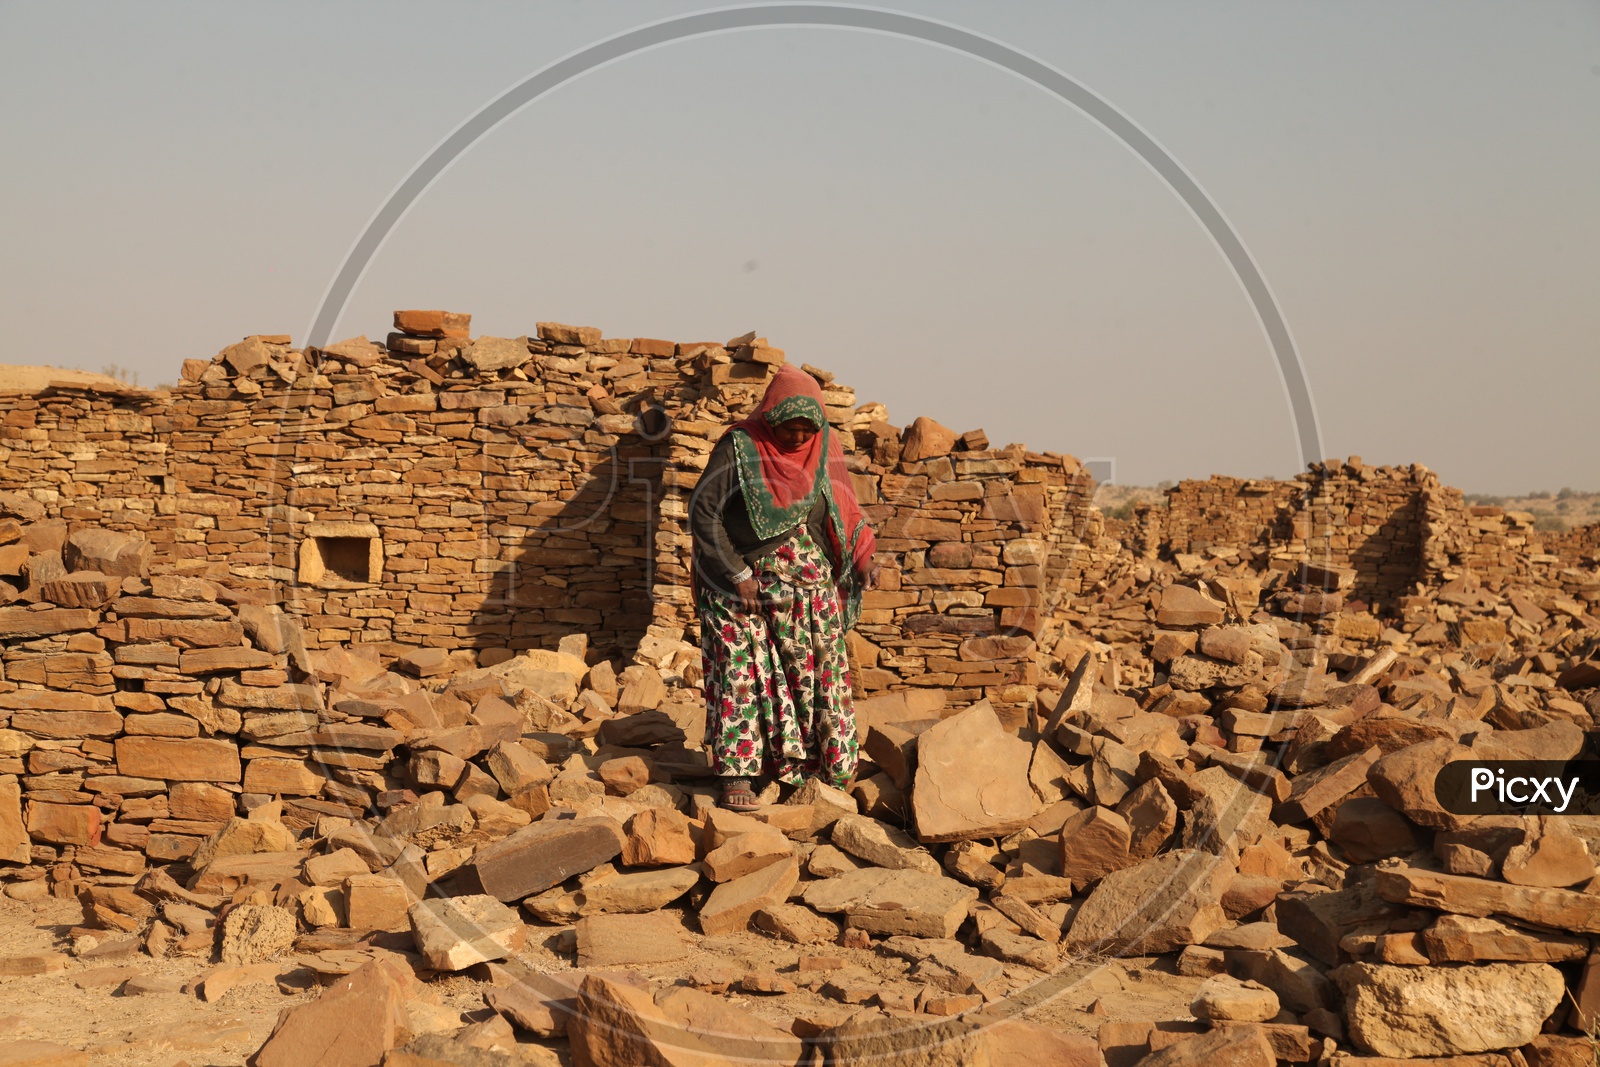 A women walking on the Ruins in the desert